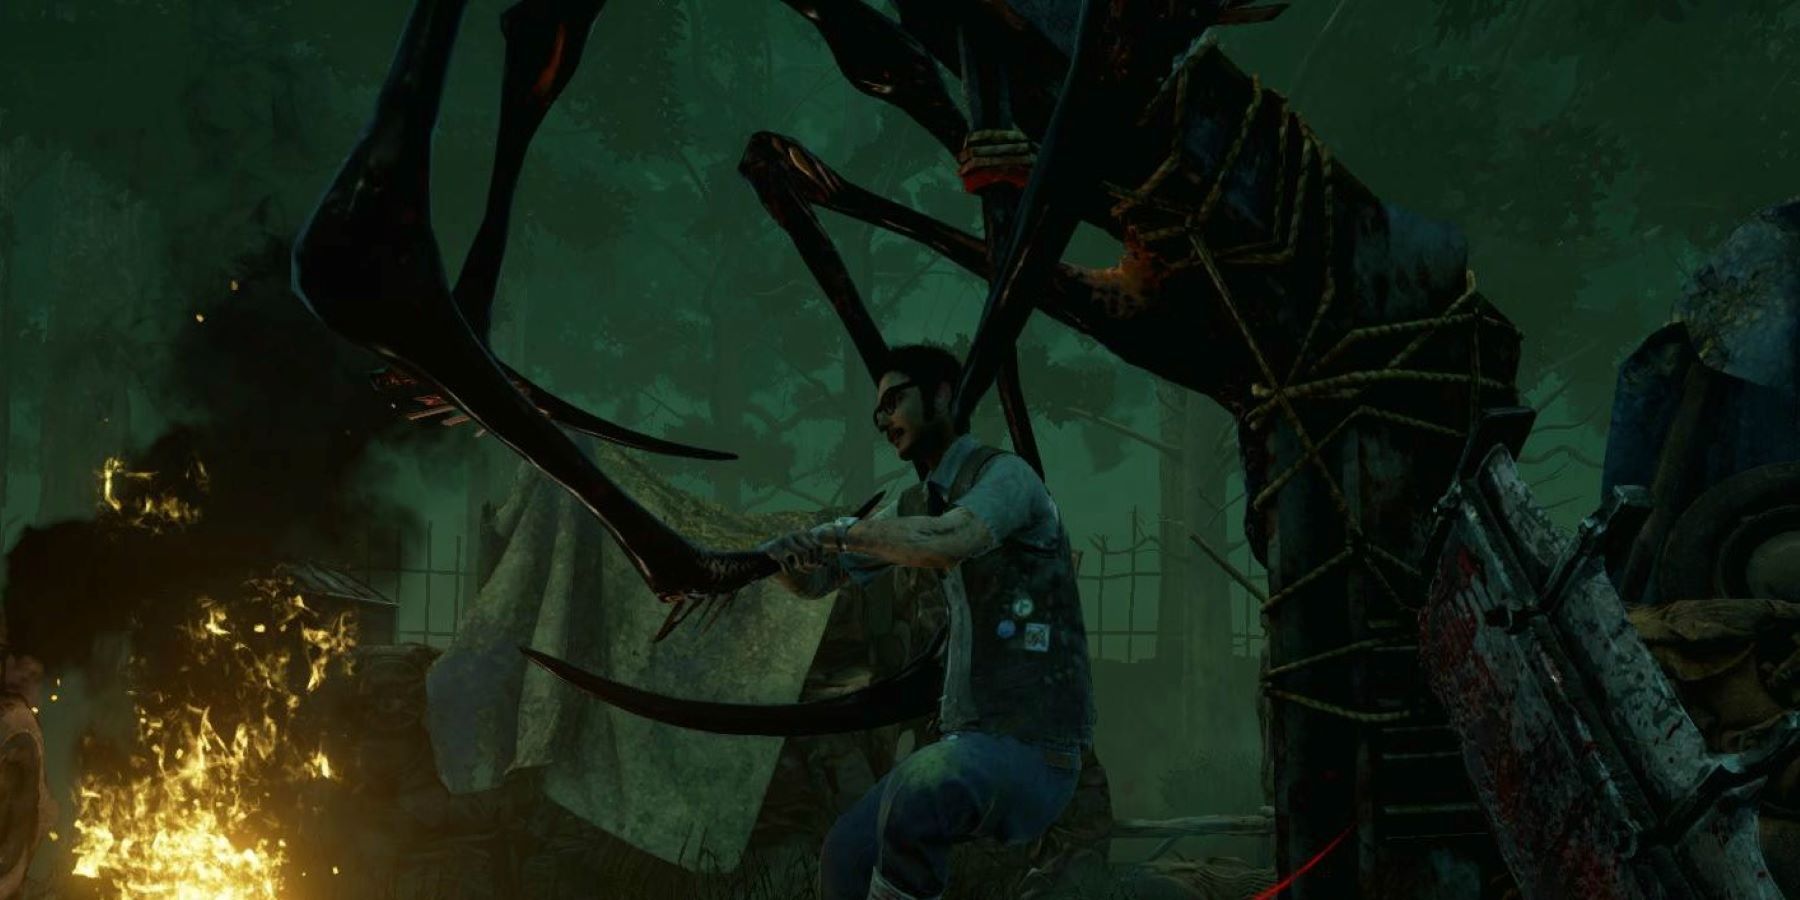 A Survivor on a hook wrestling with the Entity's claws in Dead by Daylight